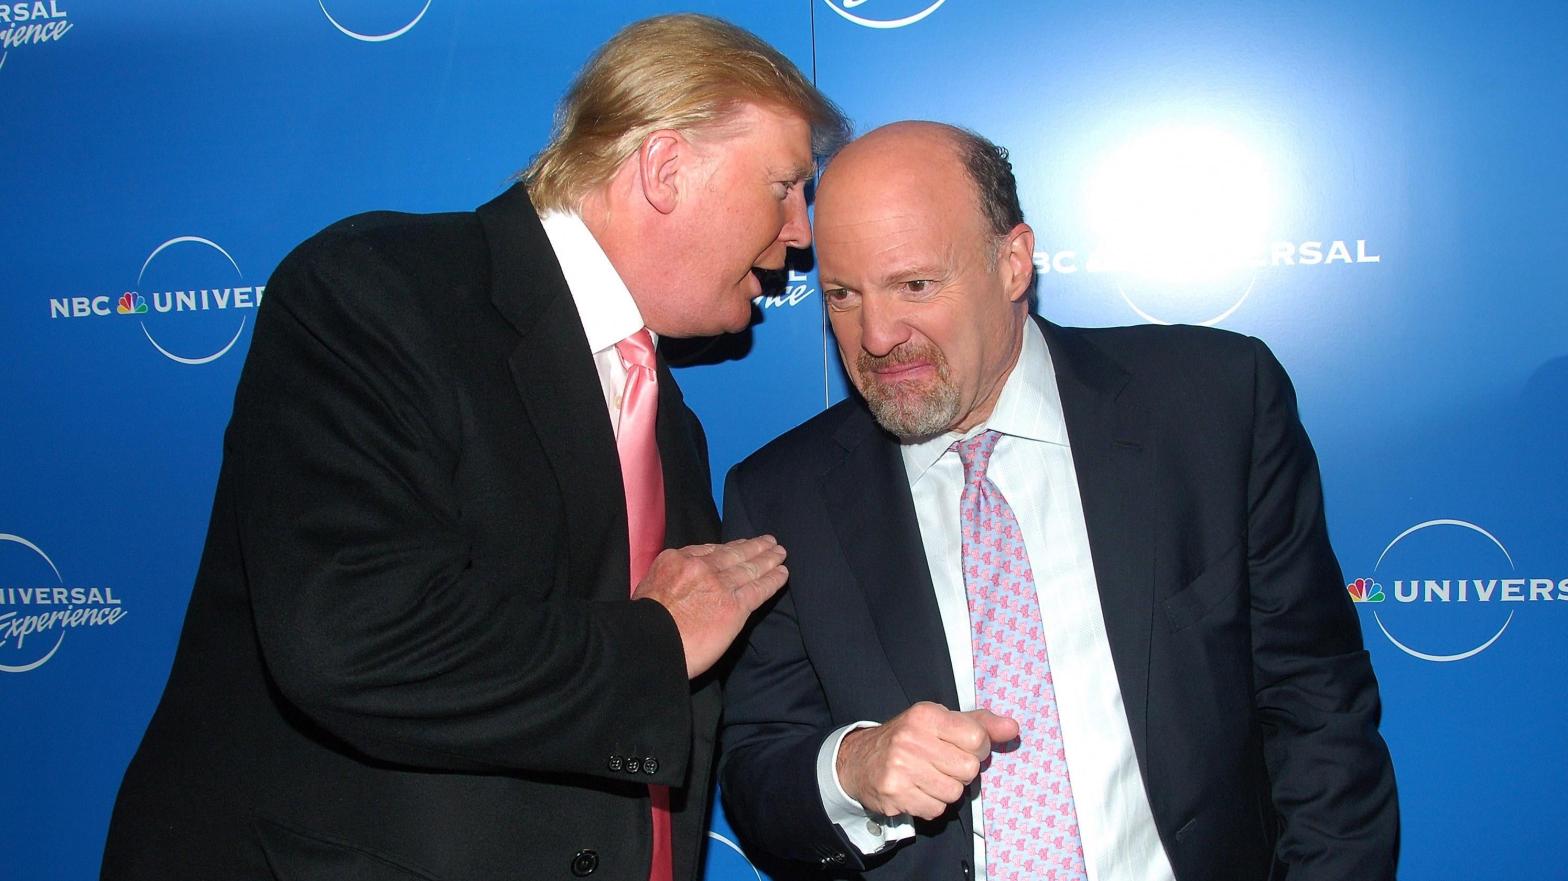 File photo of Donald Trump and Jim Cramer at Rockefeller Centre on May 12, 2008 in New York City. (Photo: Michael Loccisano/FilmMagic, Getty Images)